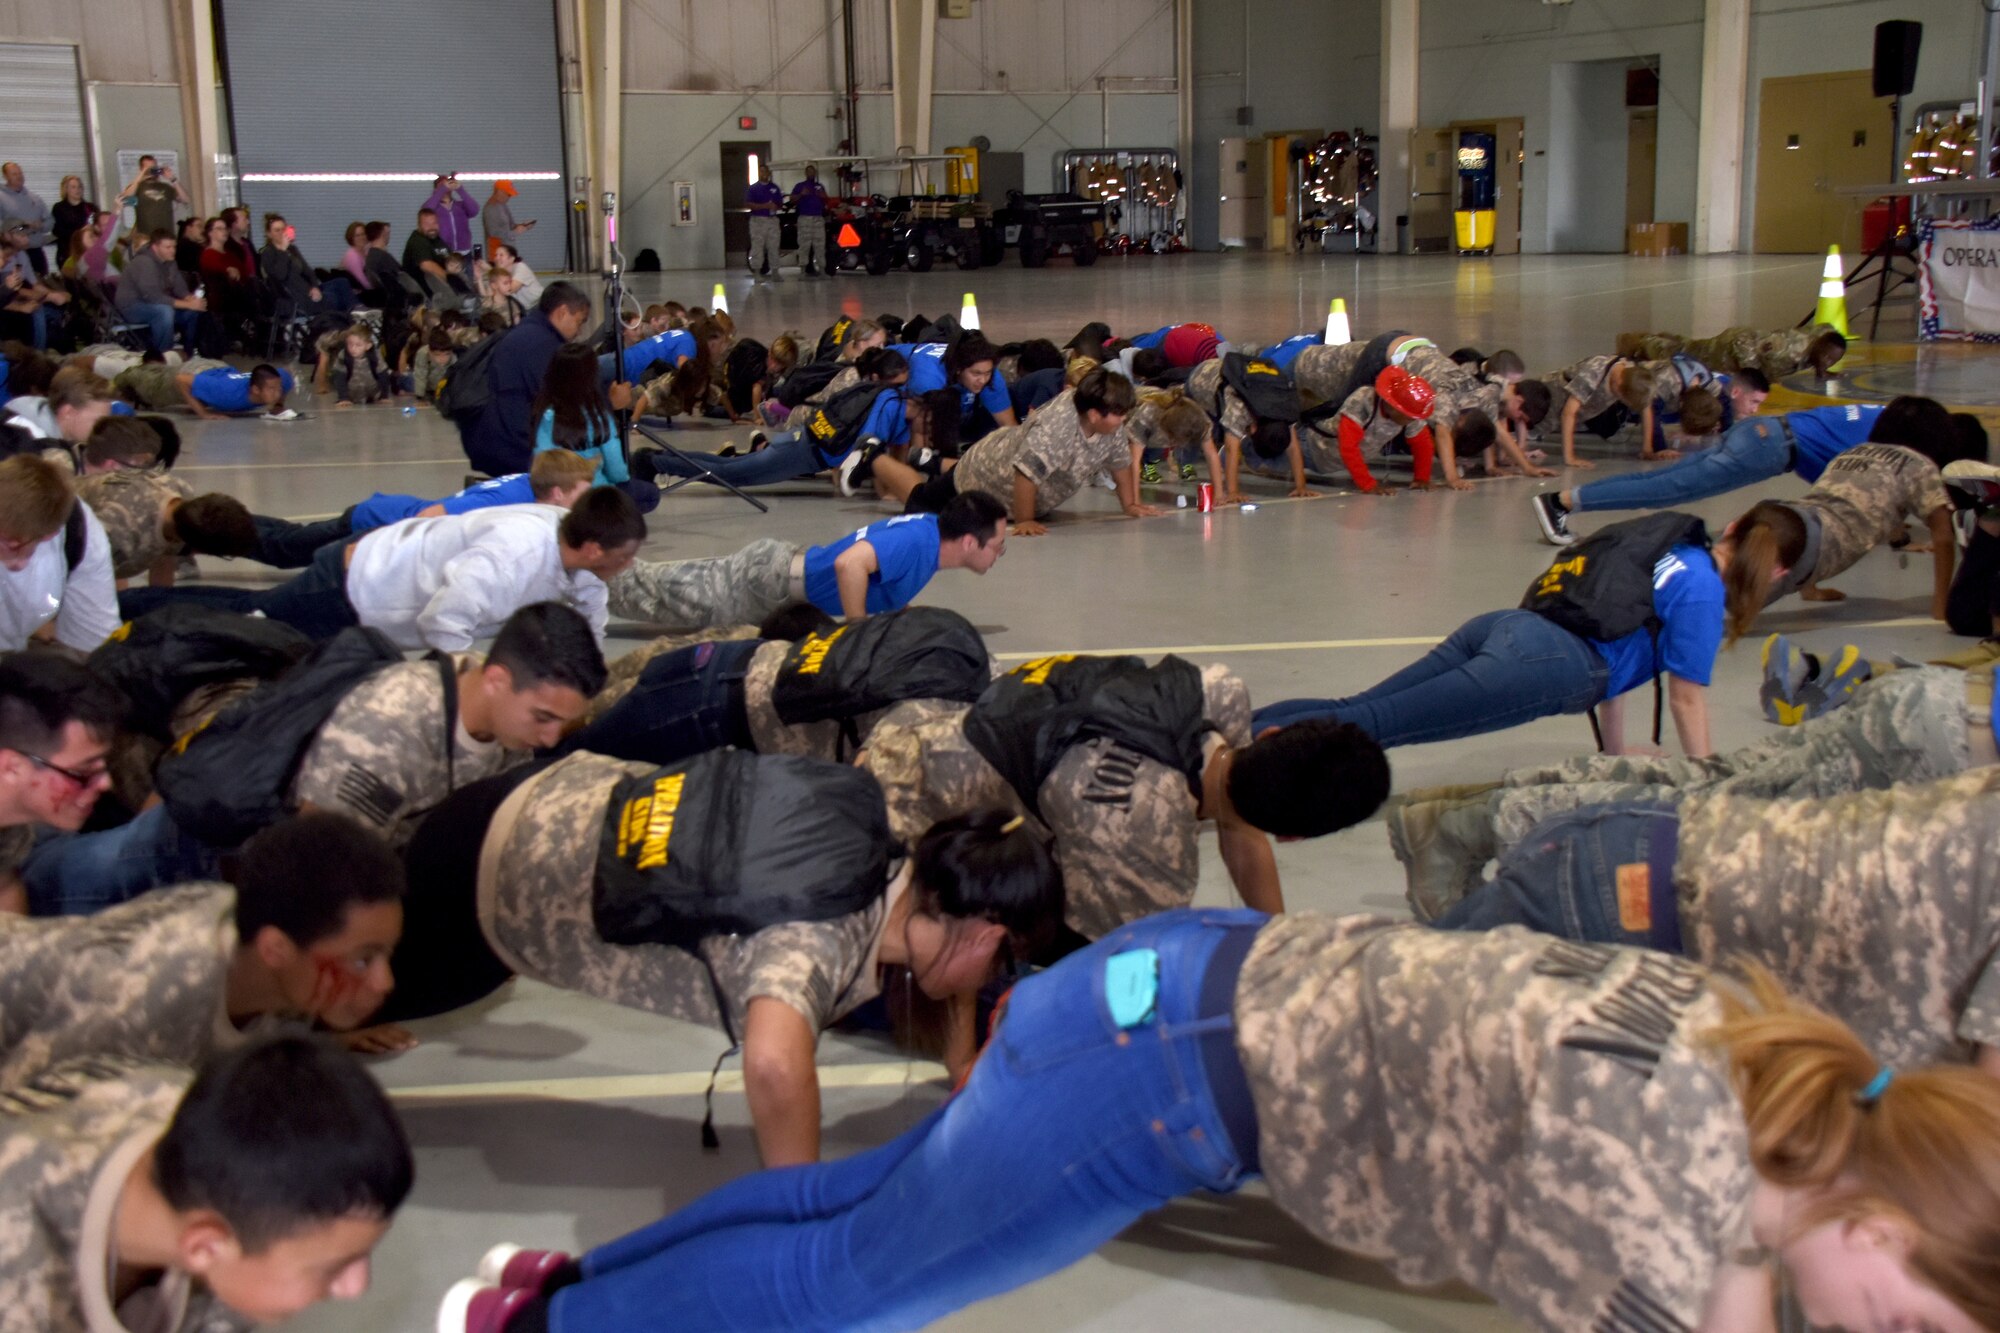 Participants in Operation KIDS perform pushups before receiving their completion certificates at the Louis F. Garland Department of Defense Fire Academy on Goodfellow Air Force Base, Texas, Nov. 3, 2018. After completing the pushups the attendees went with their drill instructors to receive their certificates from Col. Ricky Mills, 17th Training Wing commander. (U.S. Air Force photo by Airman 1st Class Seraiah Hines/Released)